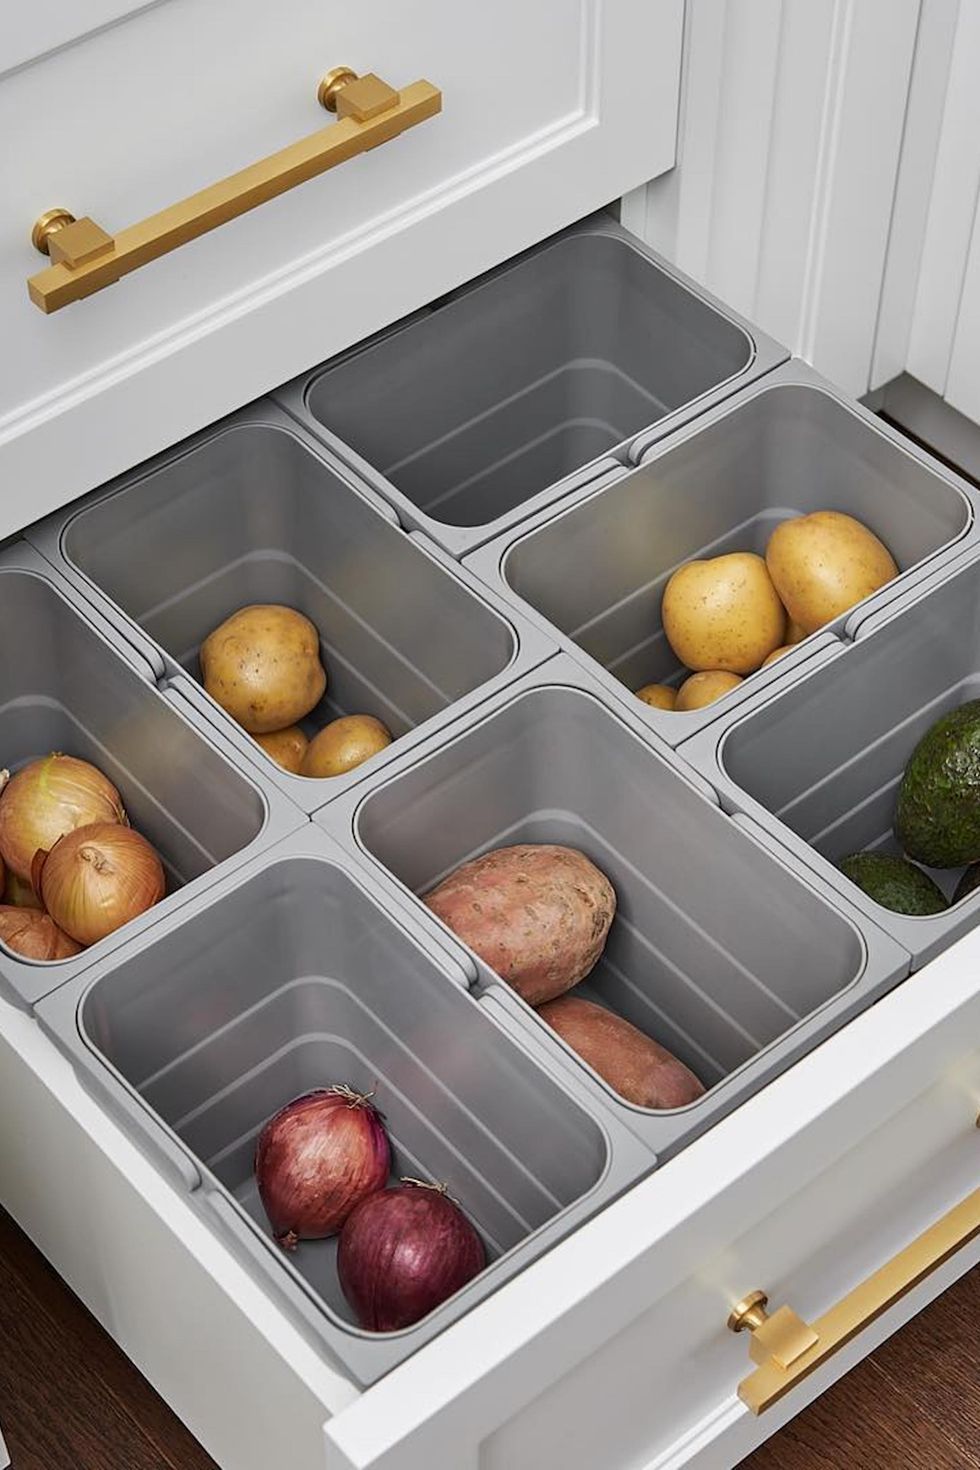 A Produce Drawer Is The Most Genius Way To Cut